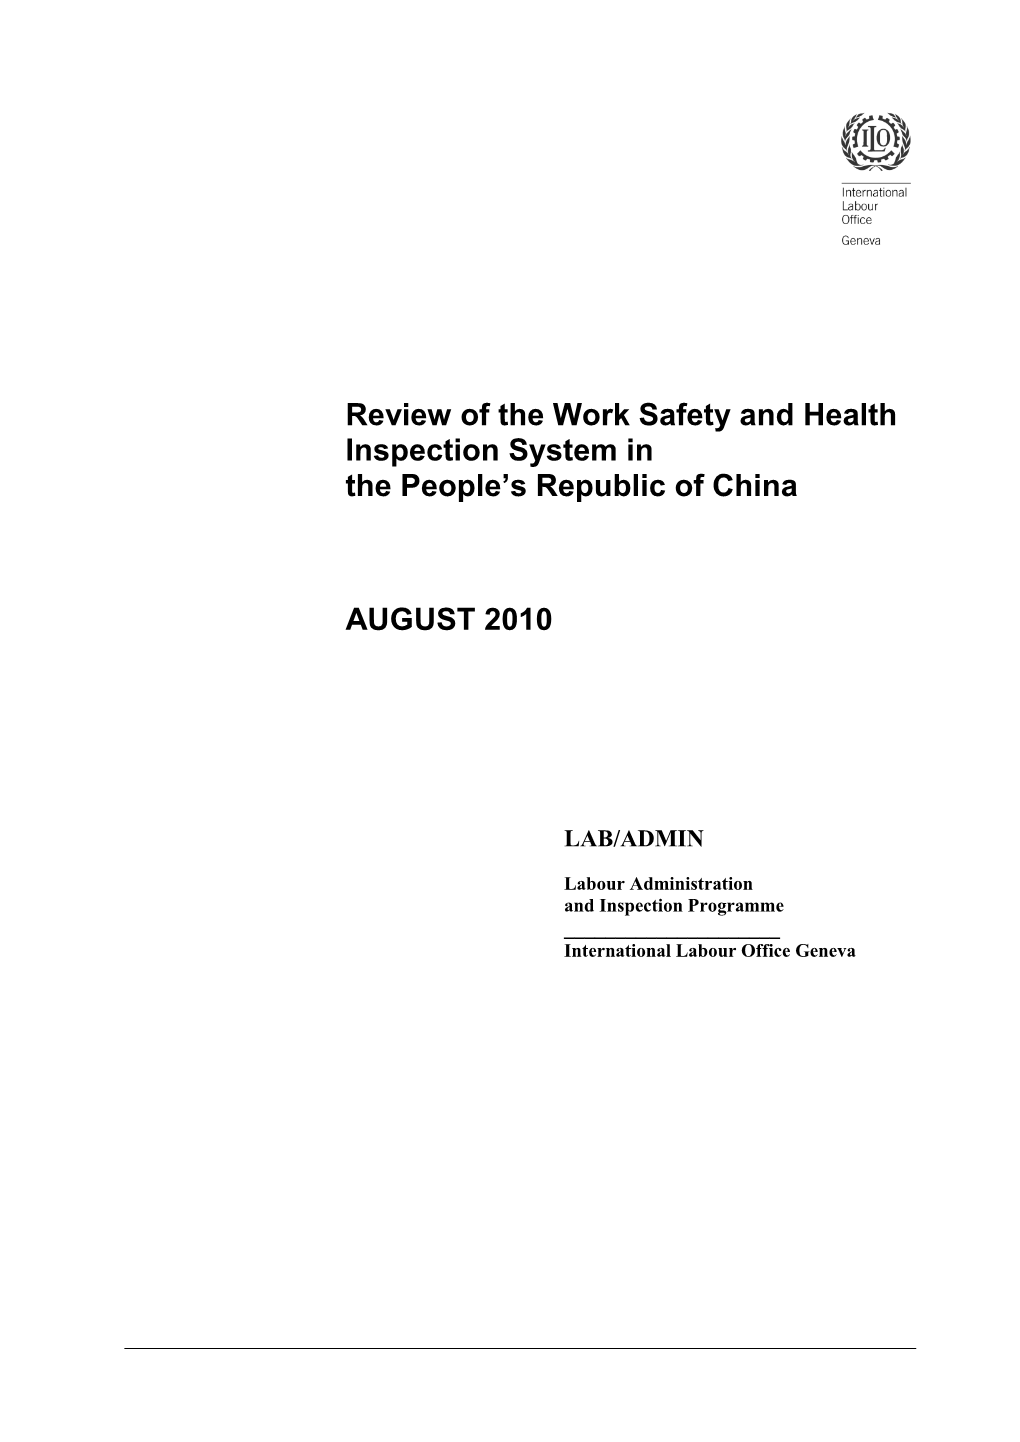 Review of the Work Safety and Health Inspection System in the People's